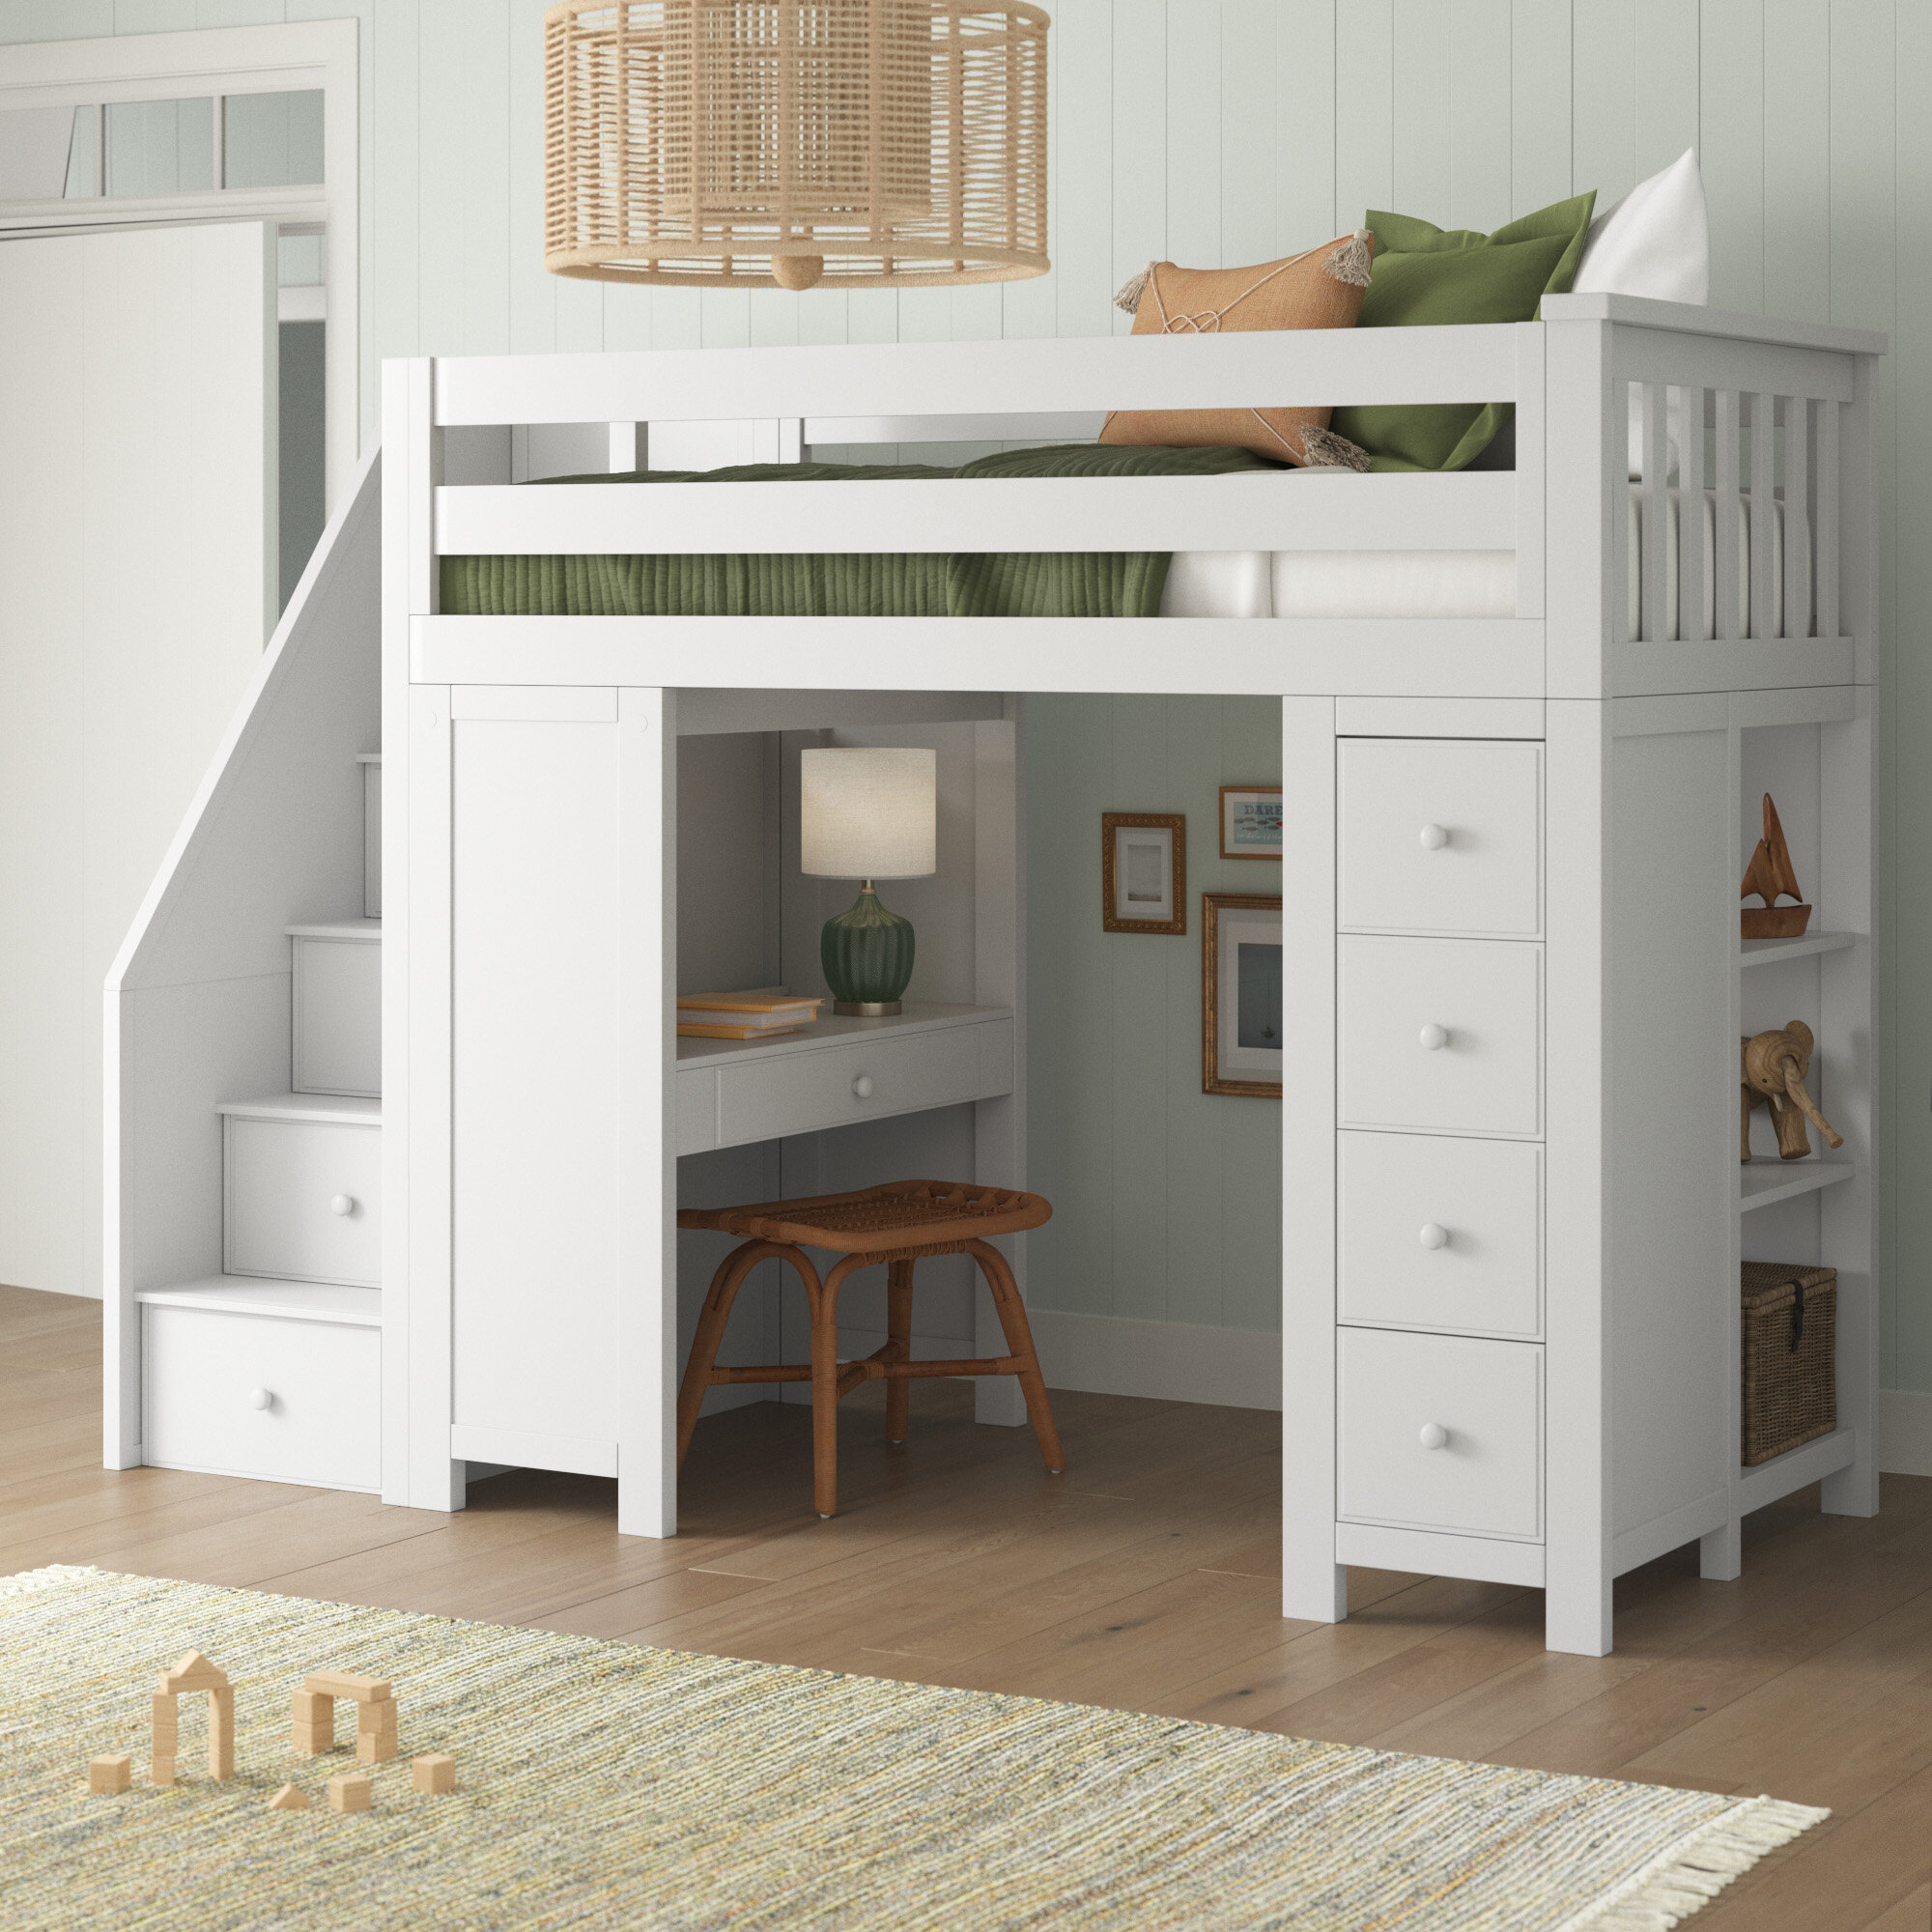 Sand & Stable Baby & Kids Cavallo Kids Bed With Drawers & Reviews | Wayfair